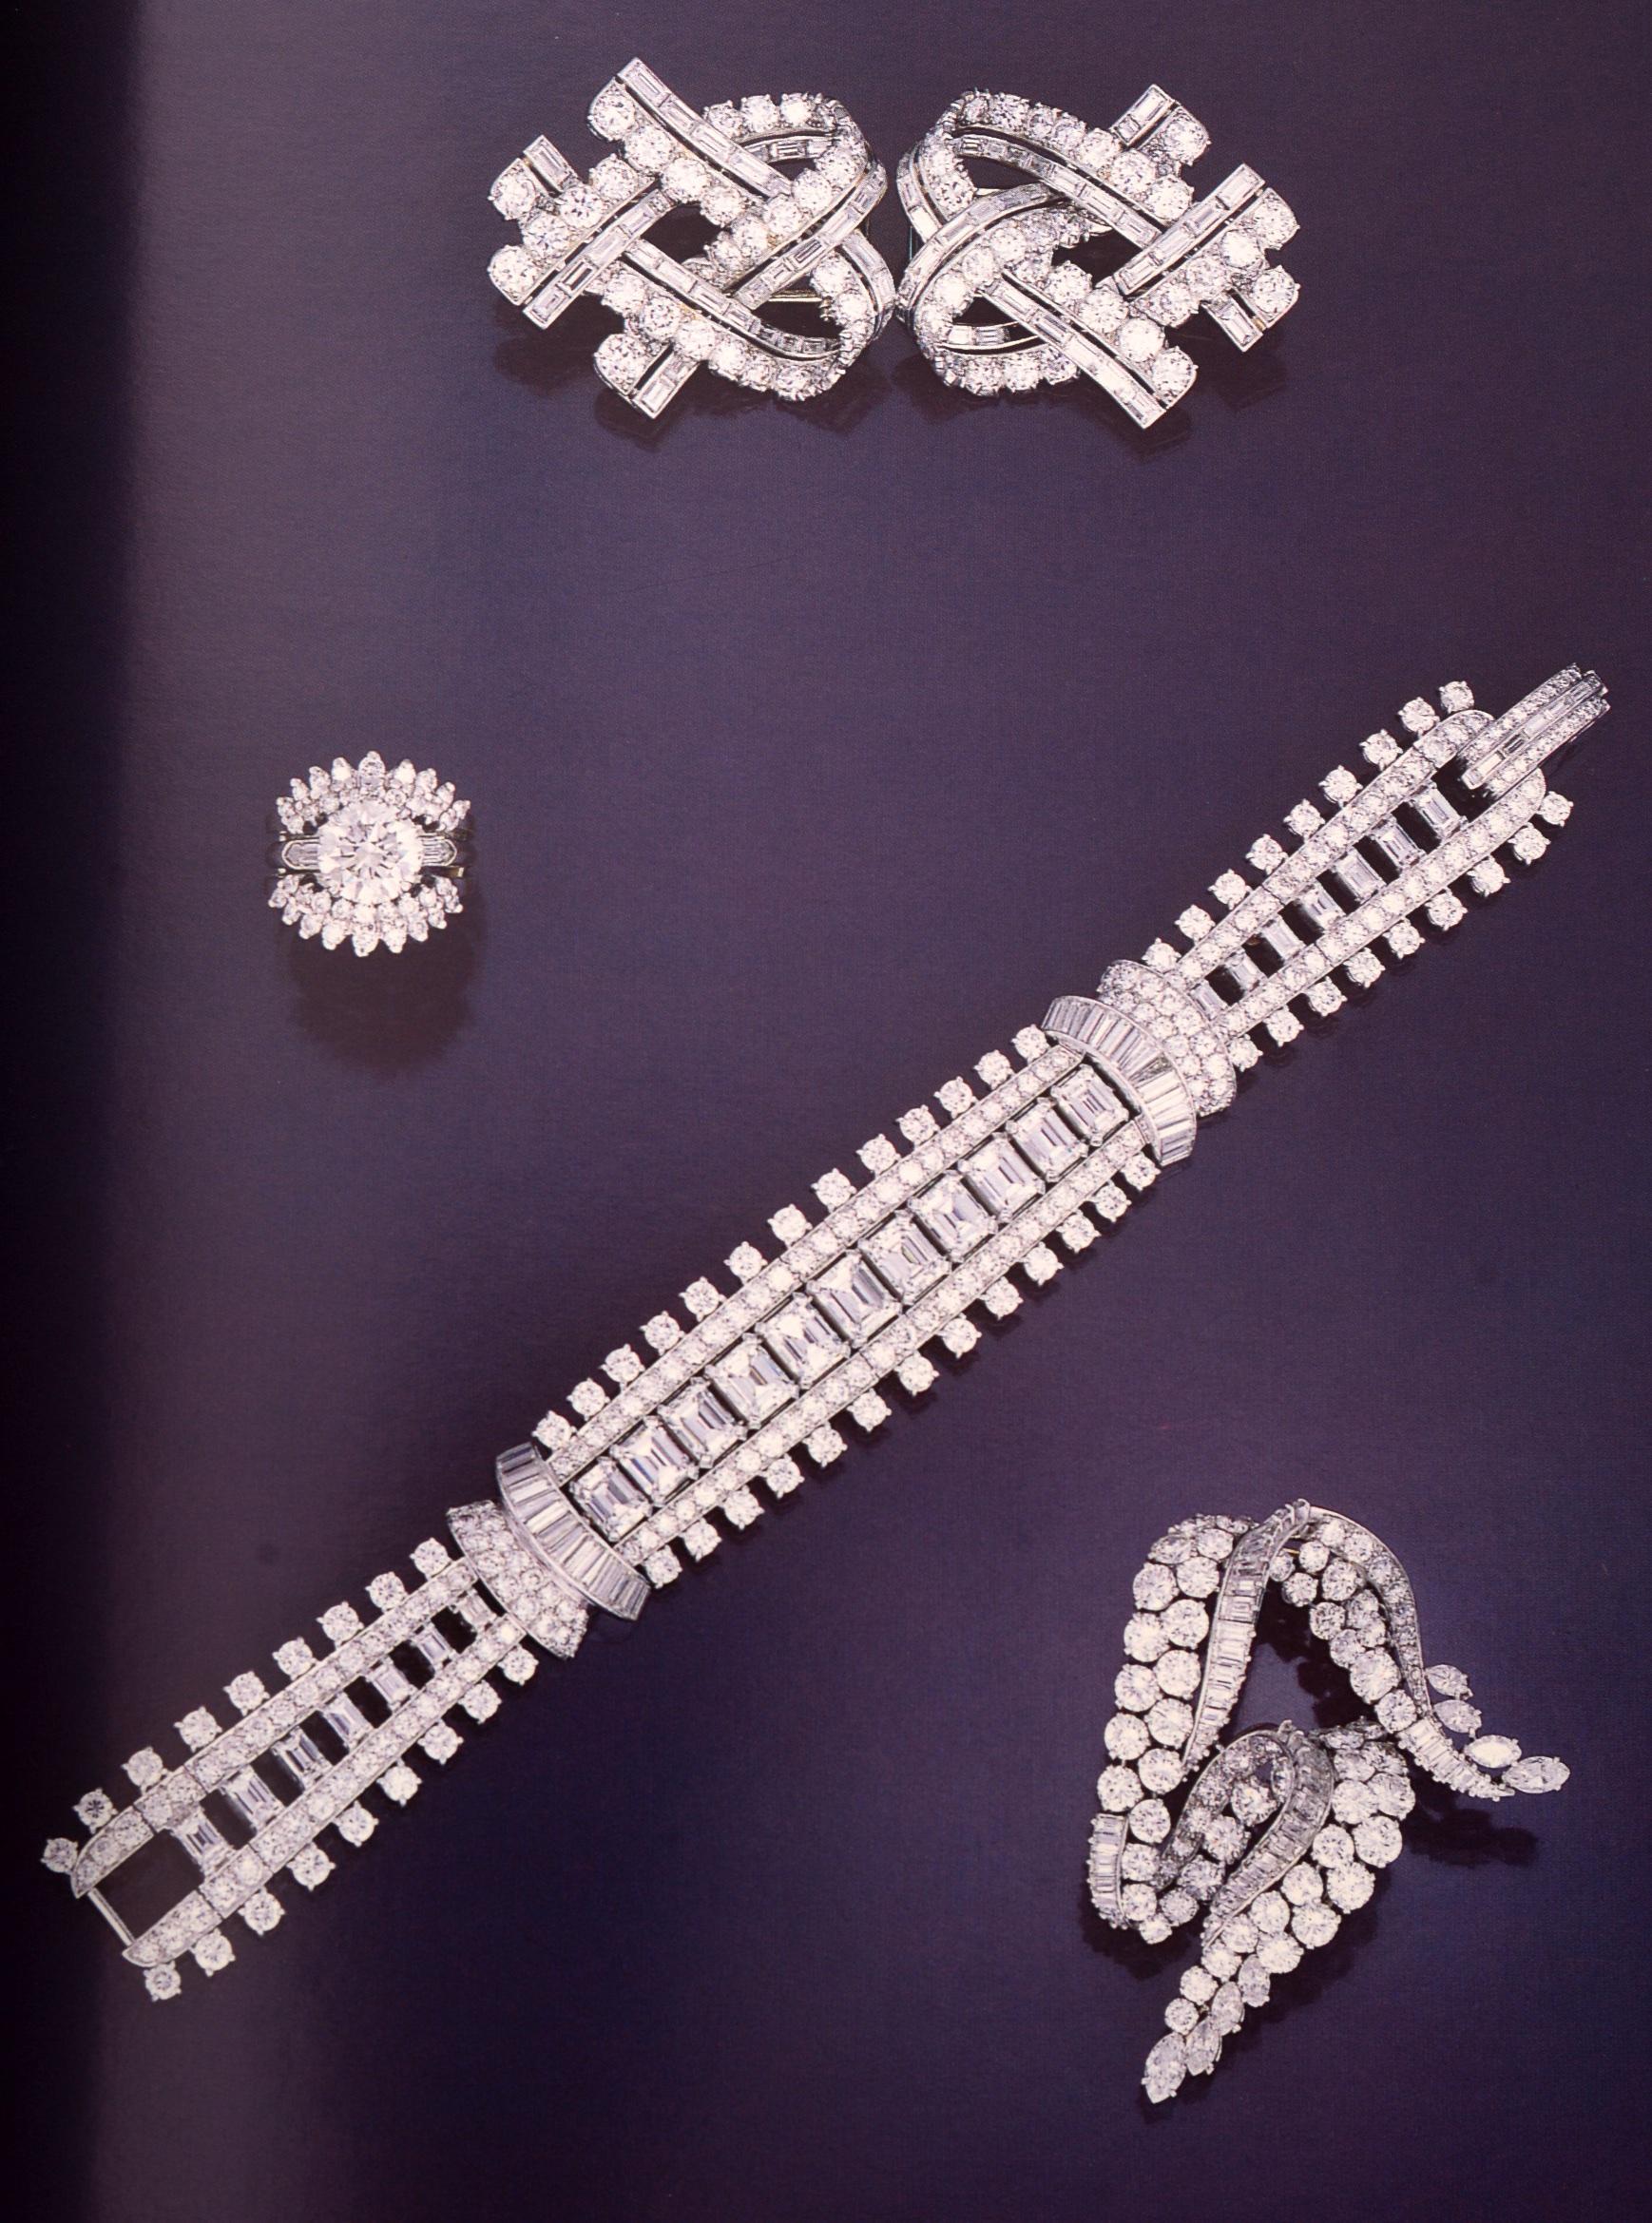 Late 20th Century Christie's Auction New York Magnificent Jewels October 21, 1992